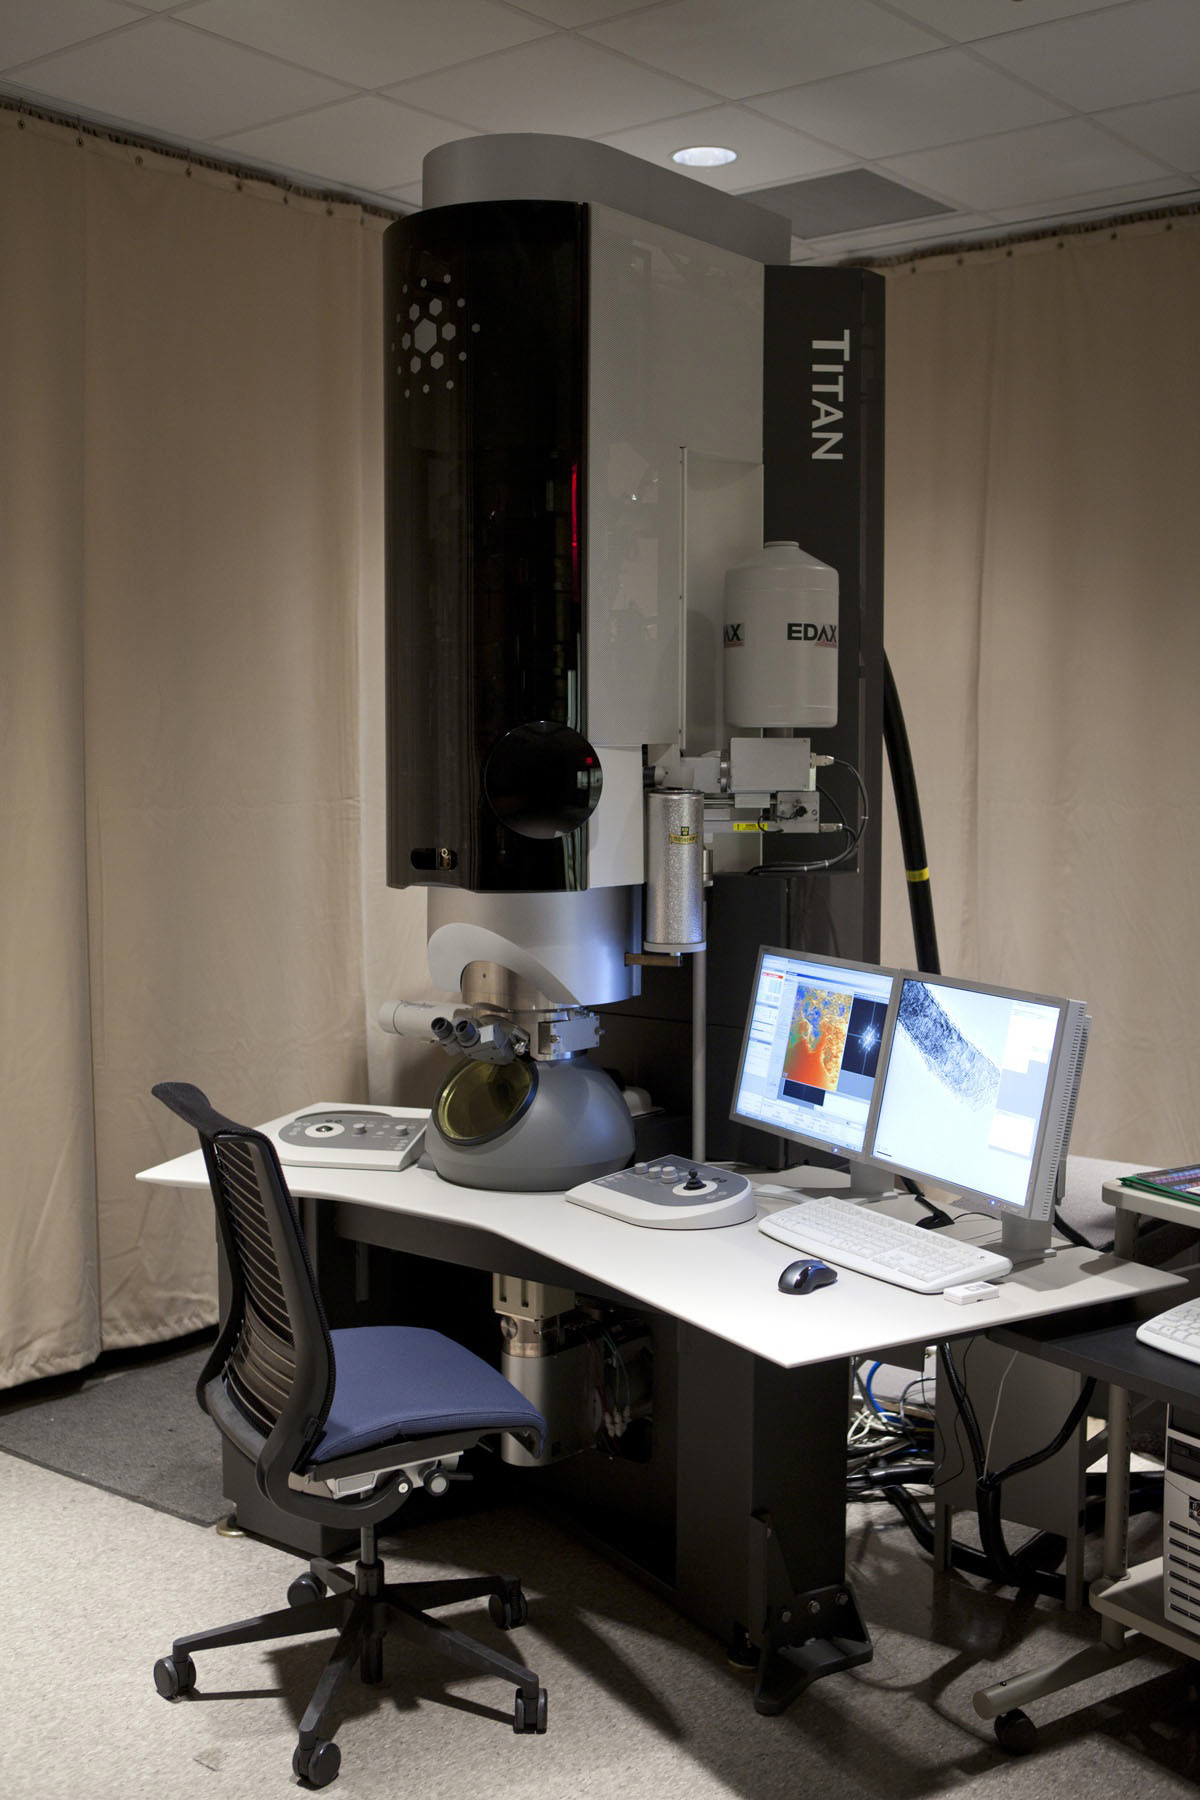 Scanning-transmission electron microscope on a desk next to a computer